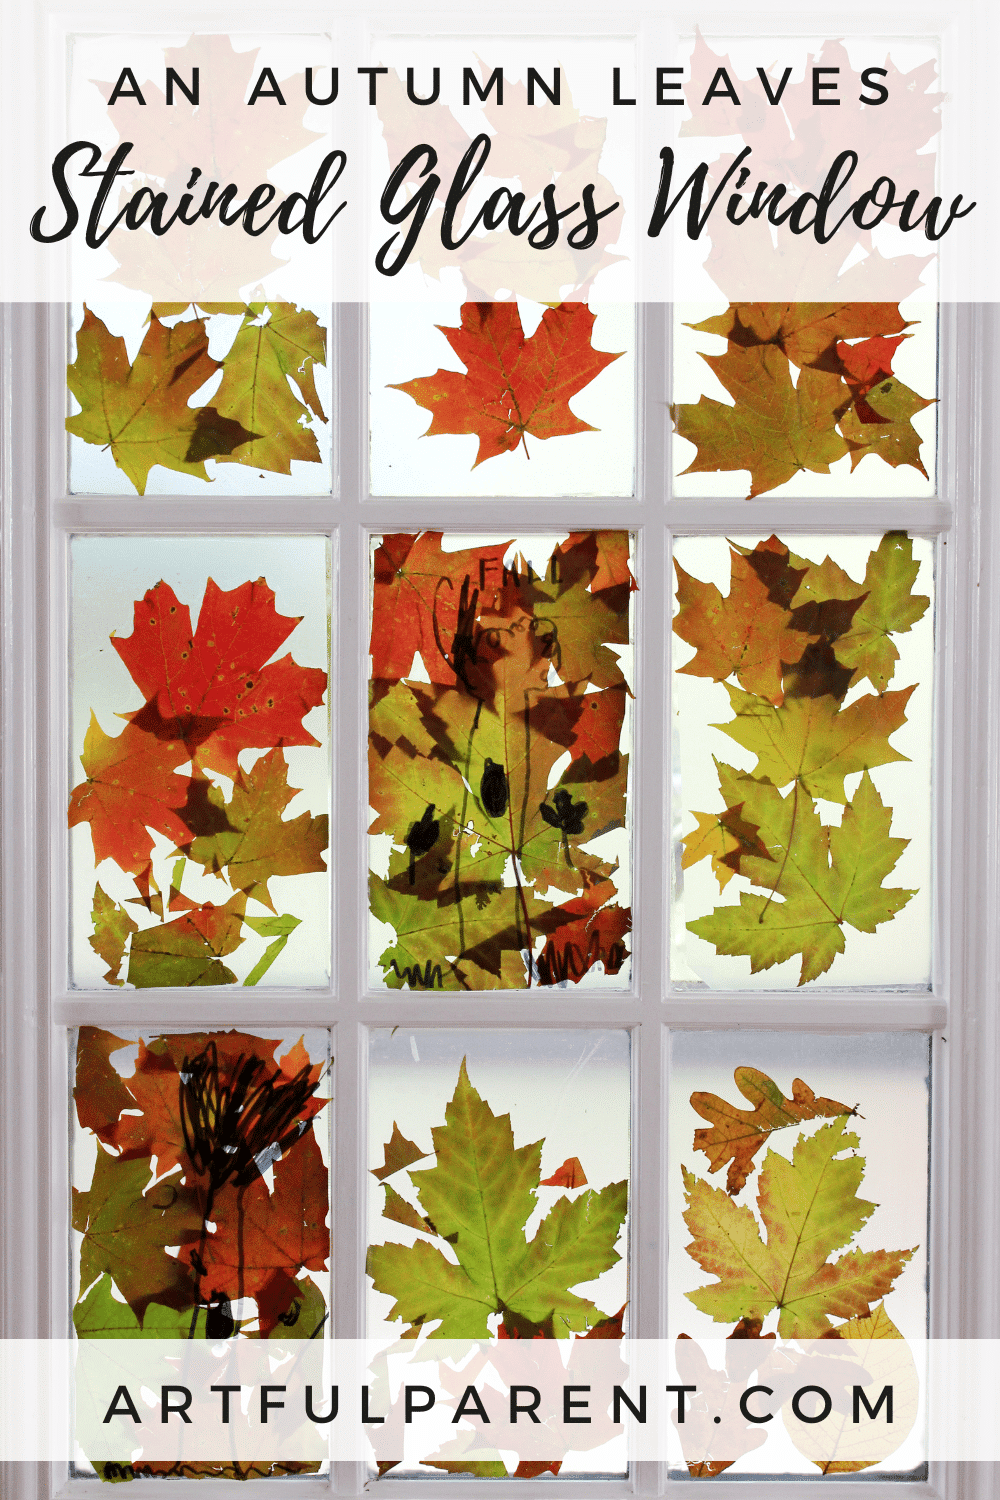 How to Make an Autumn Leaves Stained Glass Window